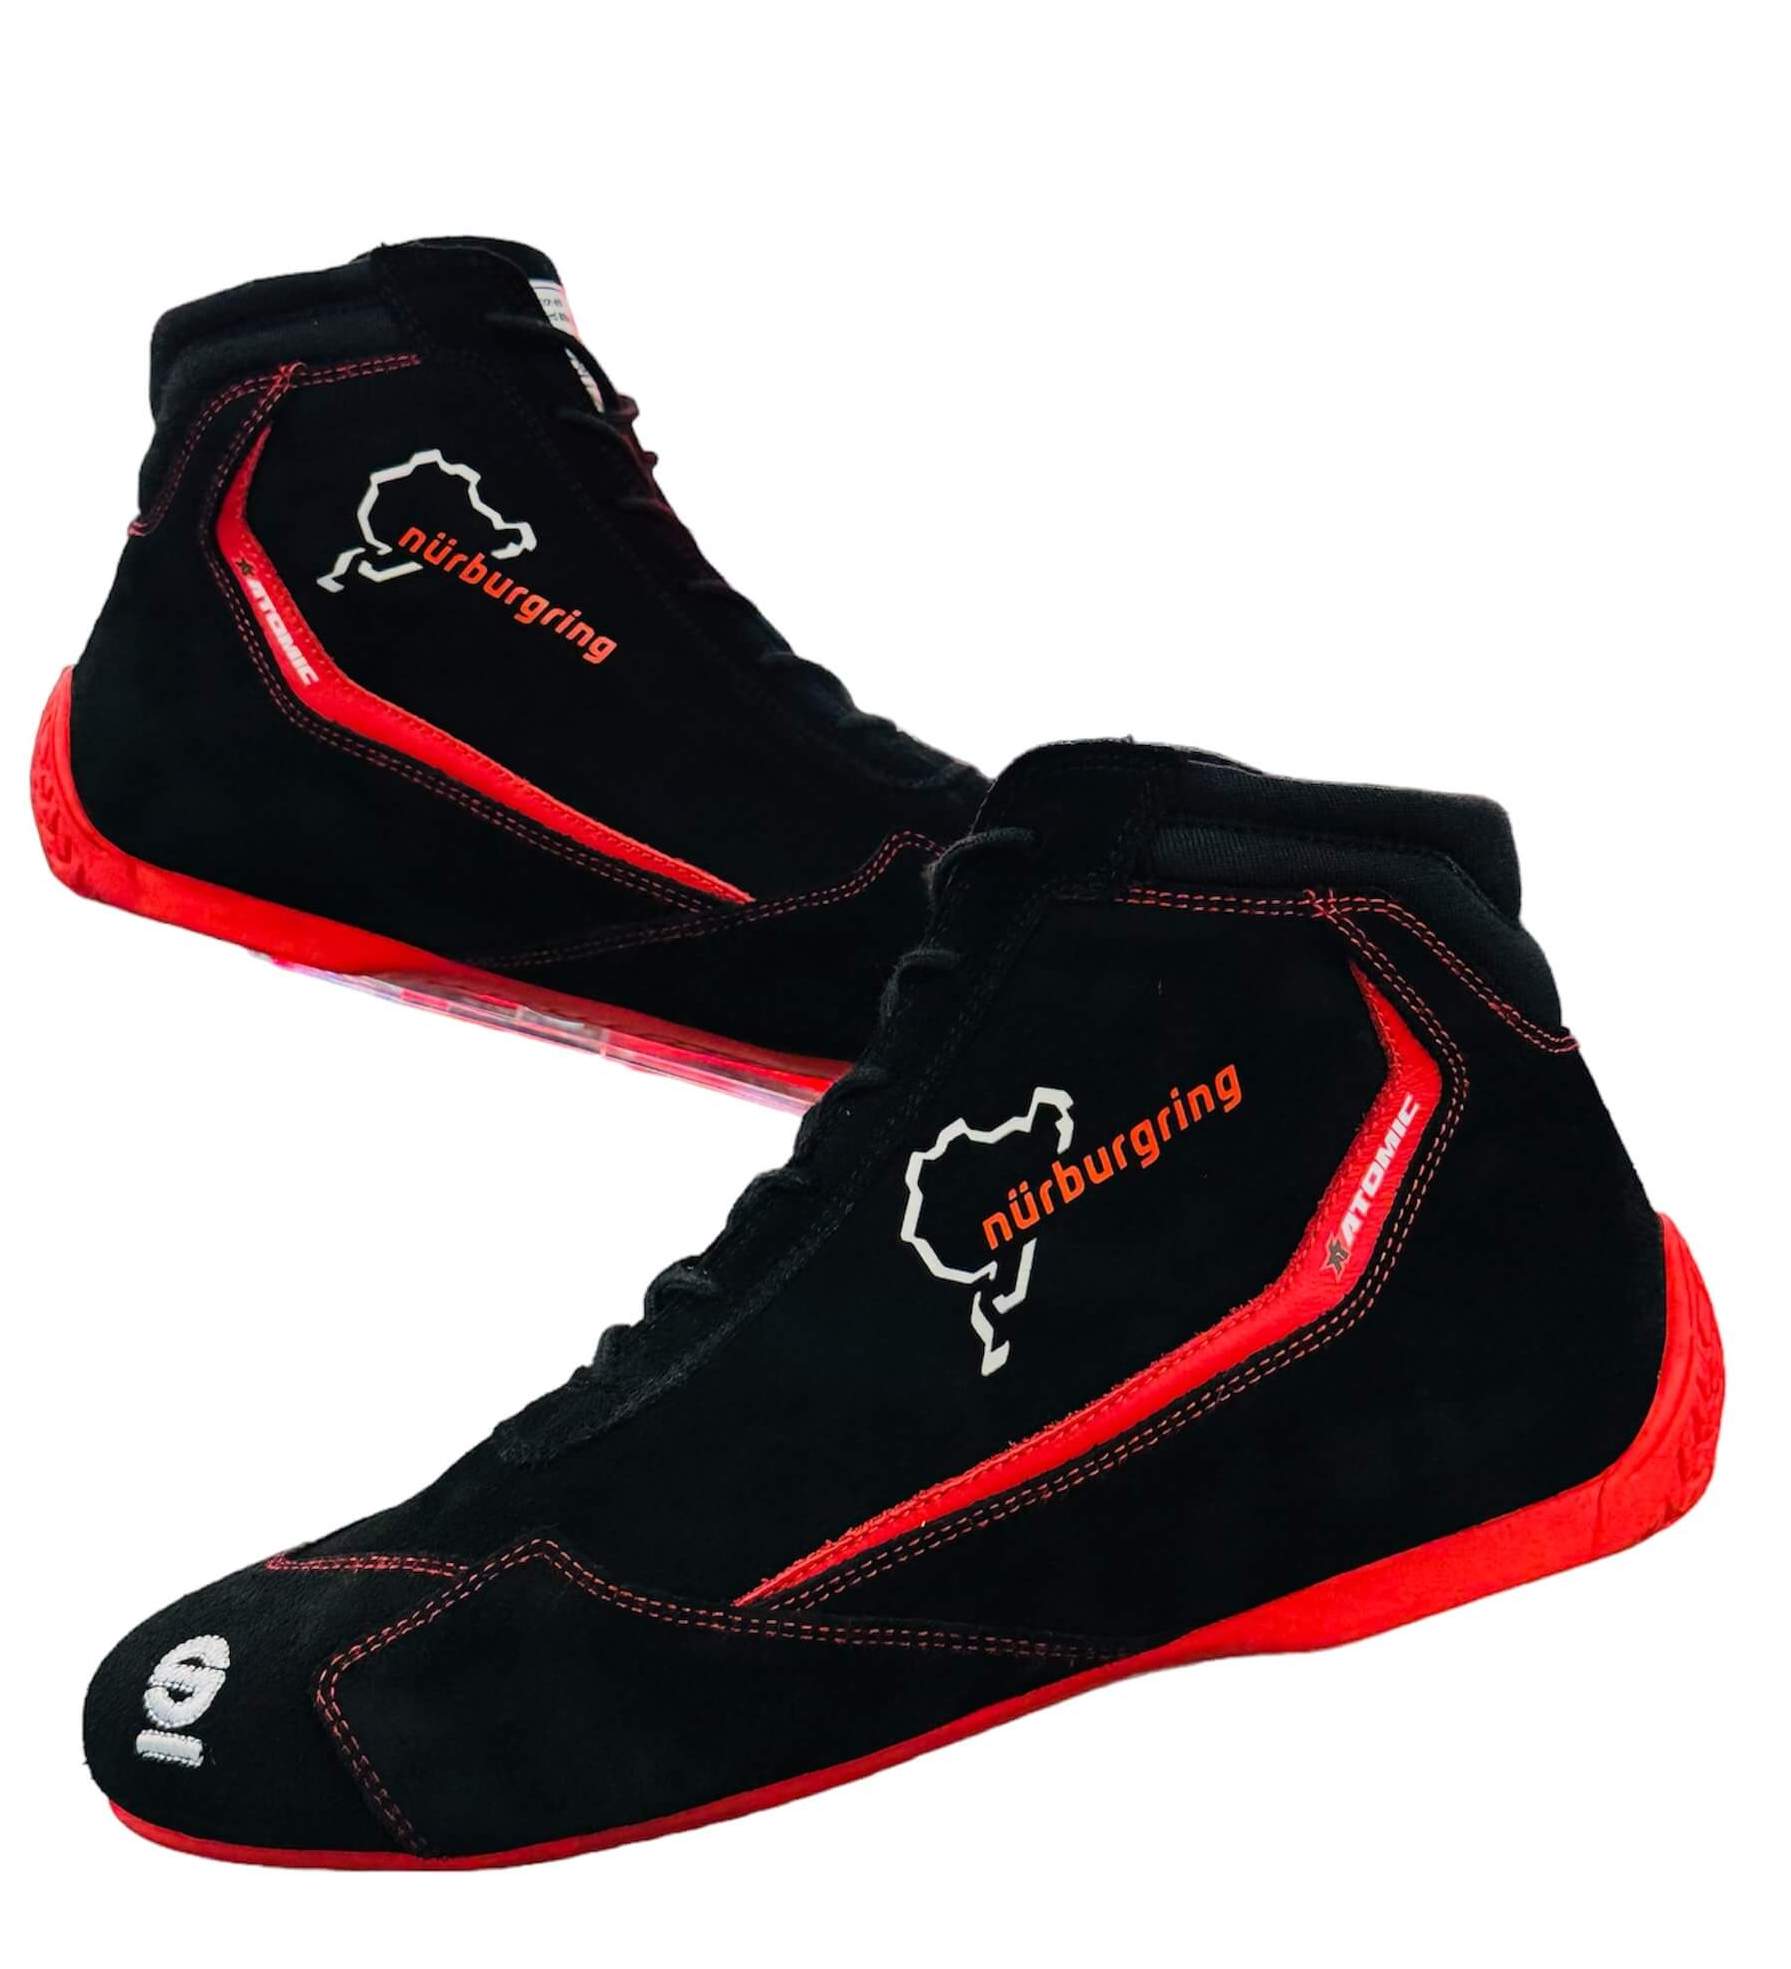 SPARCO 001295SP_NBR40 Shoes Slalom Nurburgring Edition black/red Size 40 Photo-3 